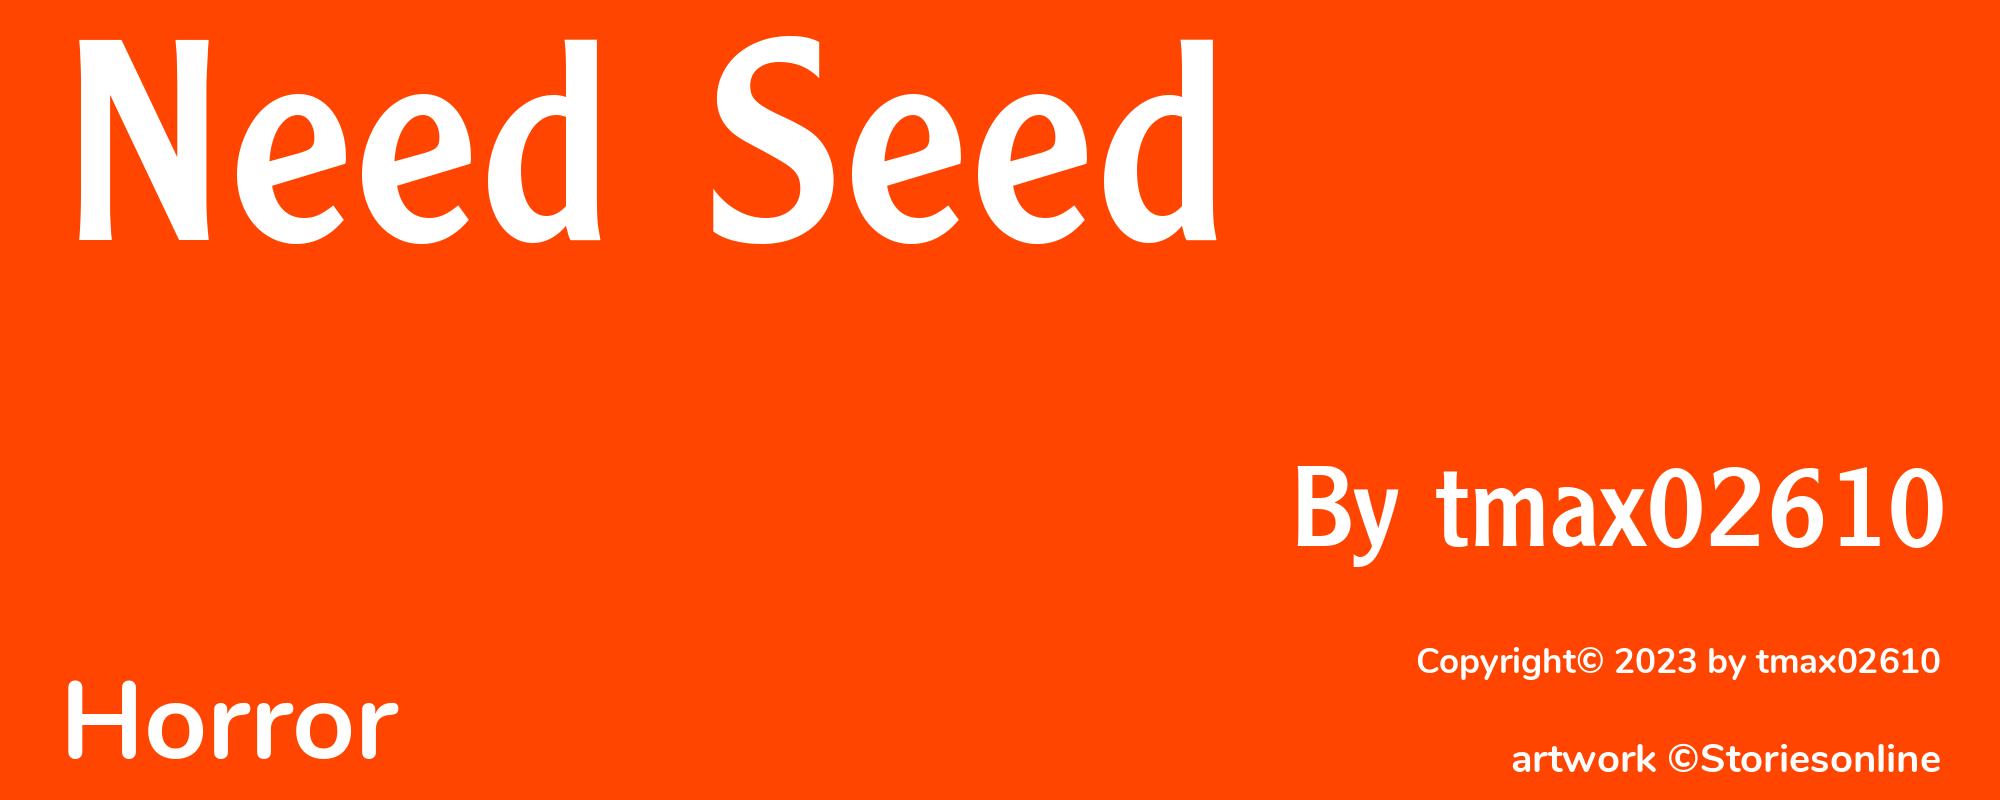 Need Seed - Cover